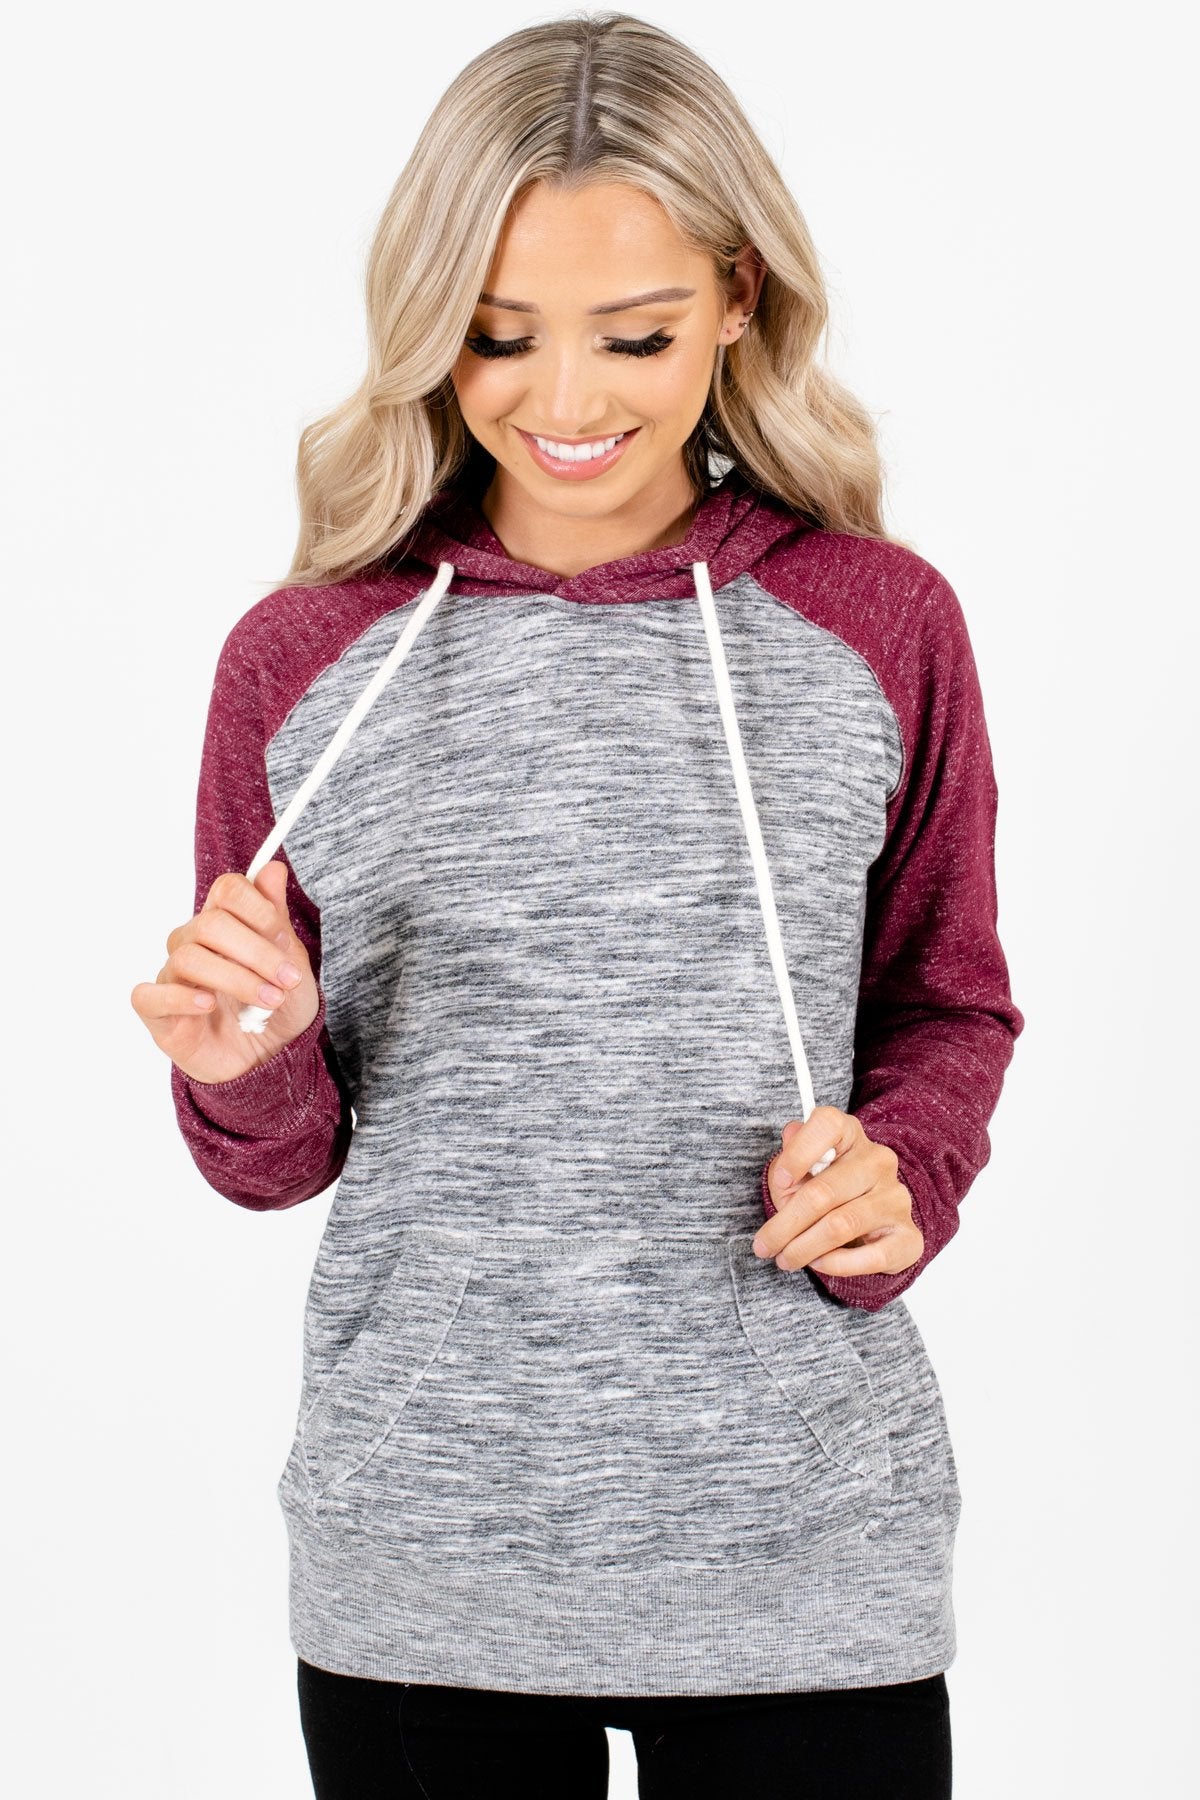 Women’s Burgundy Warm and Cozy Boutique Hoodies